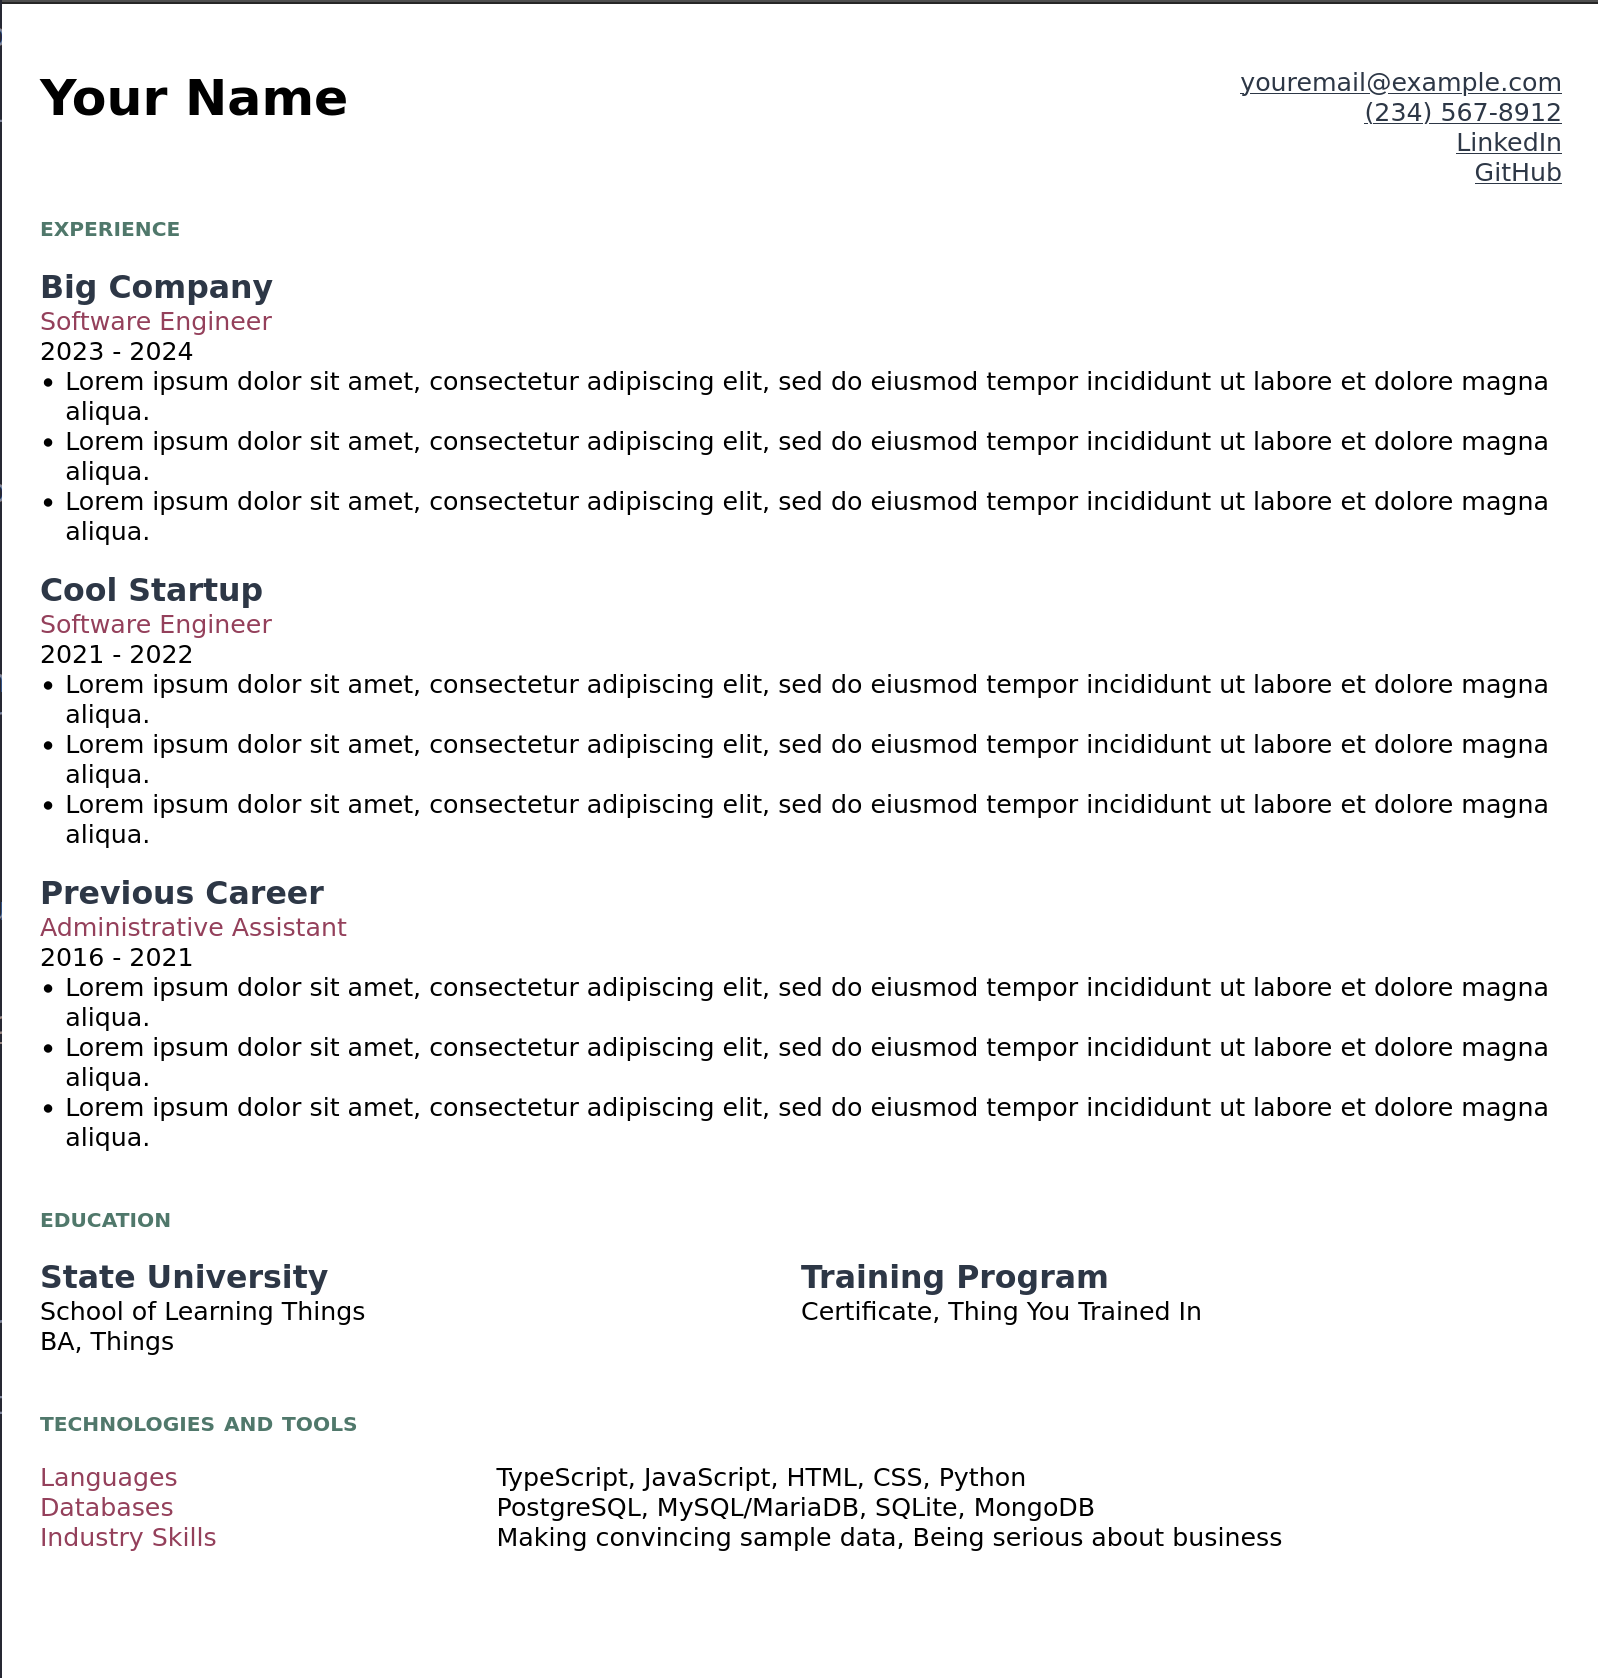 Screenshot of a resume rendered in a web browser